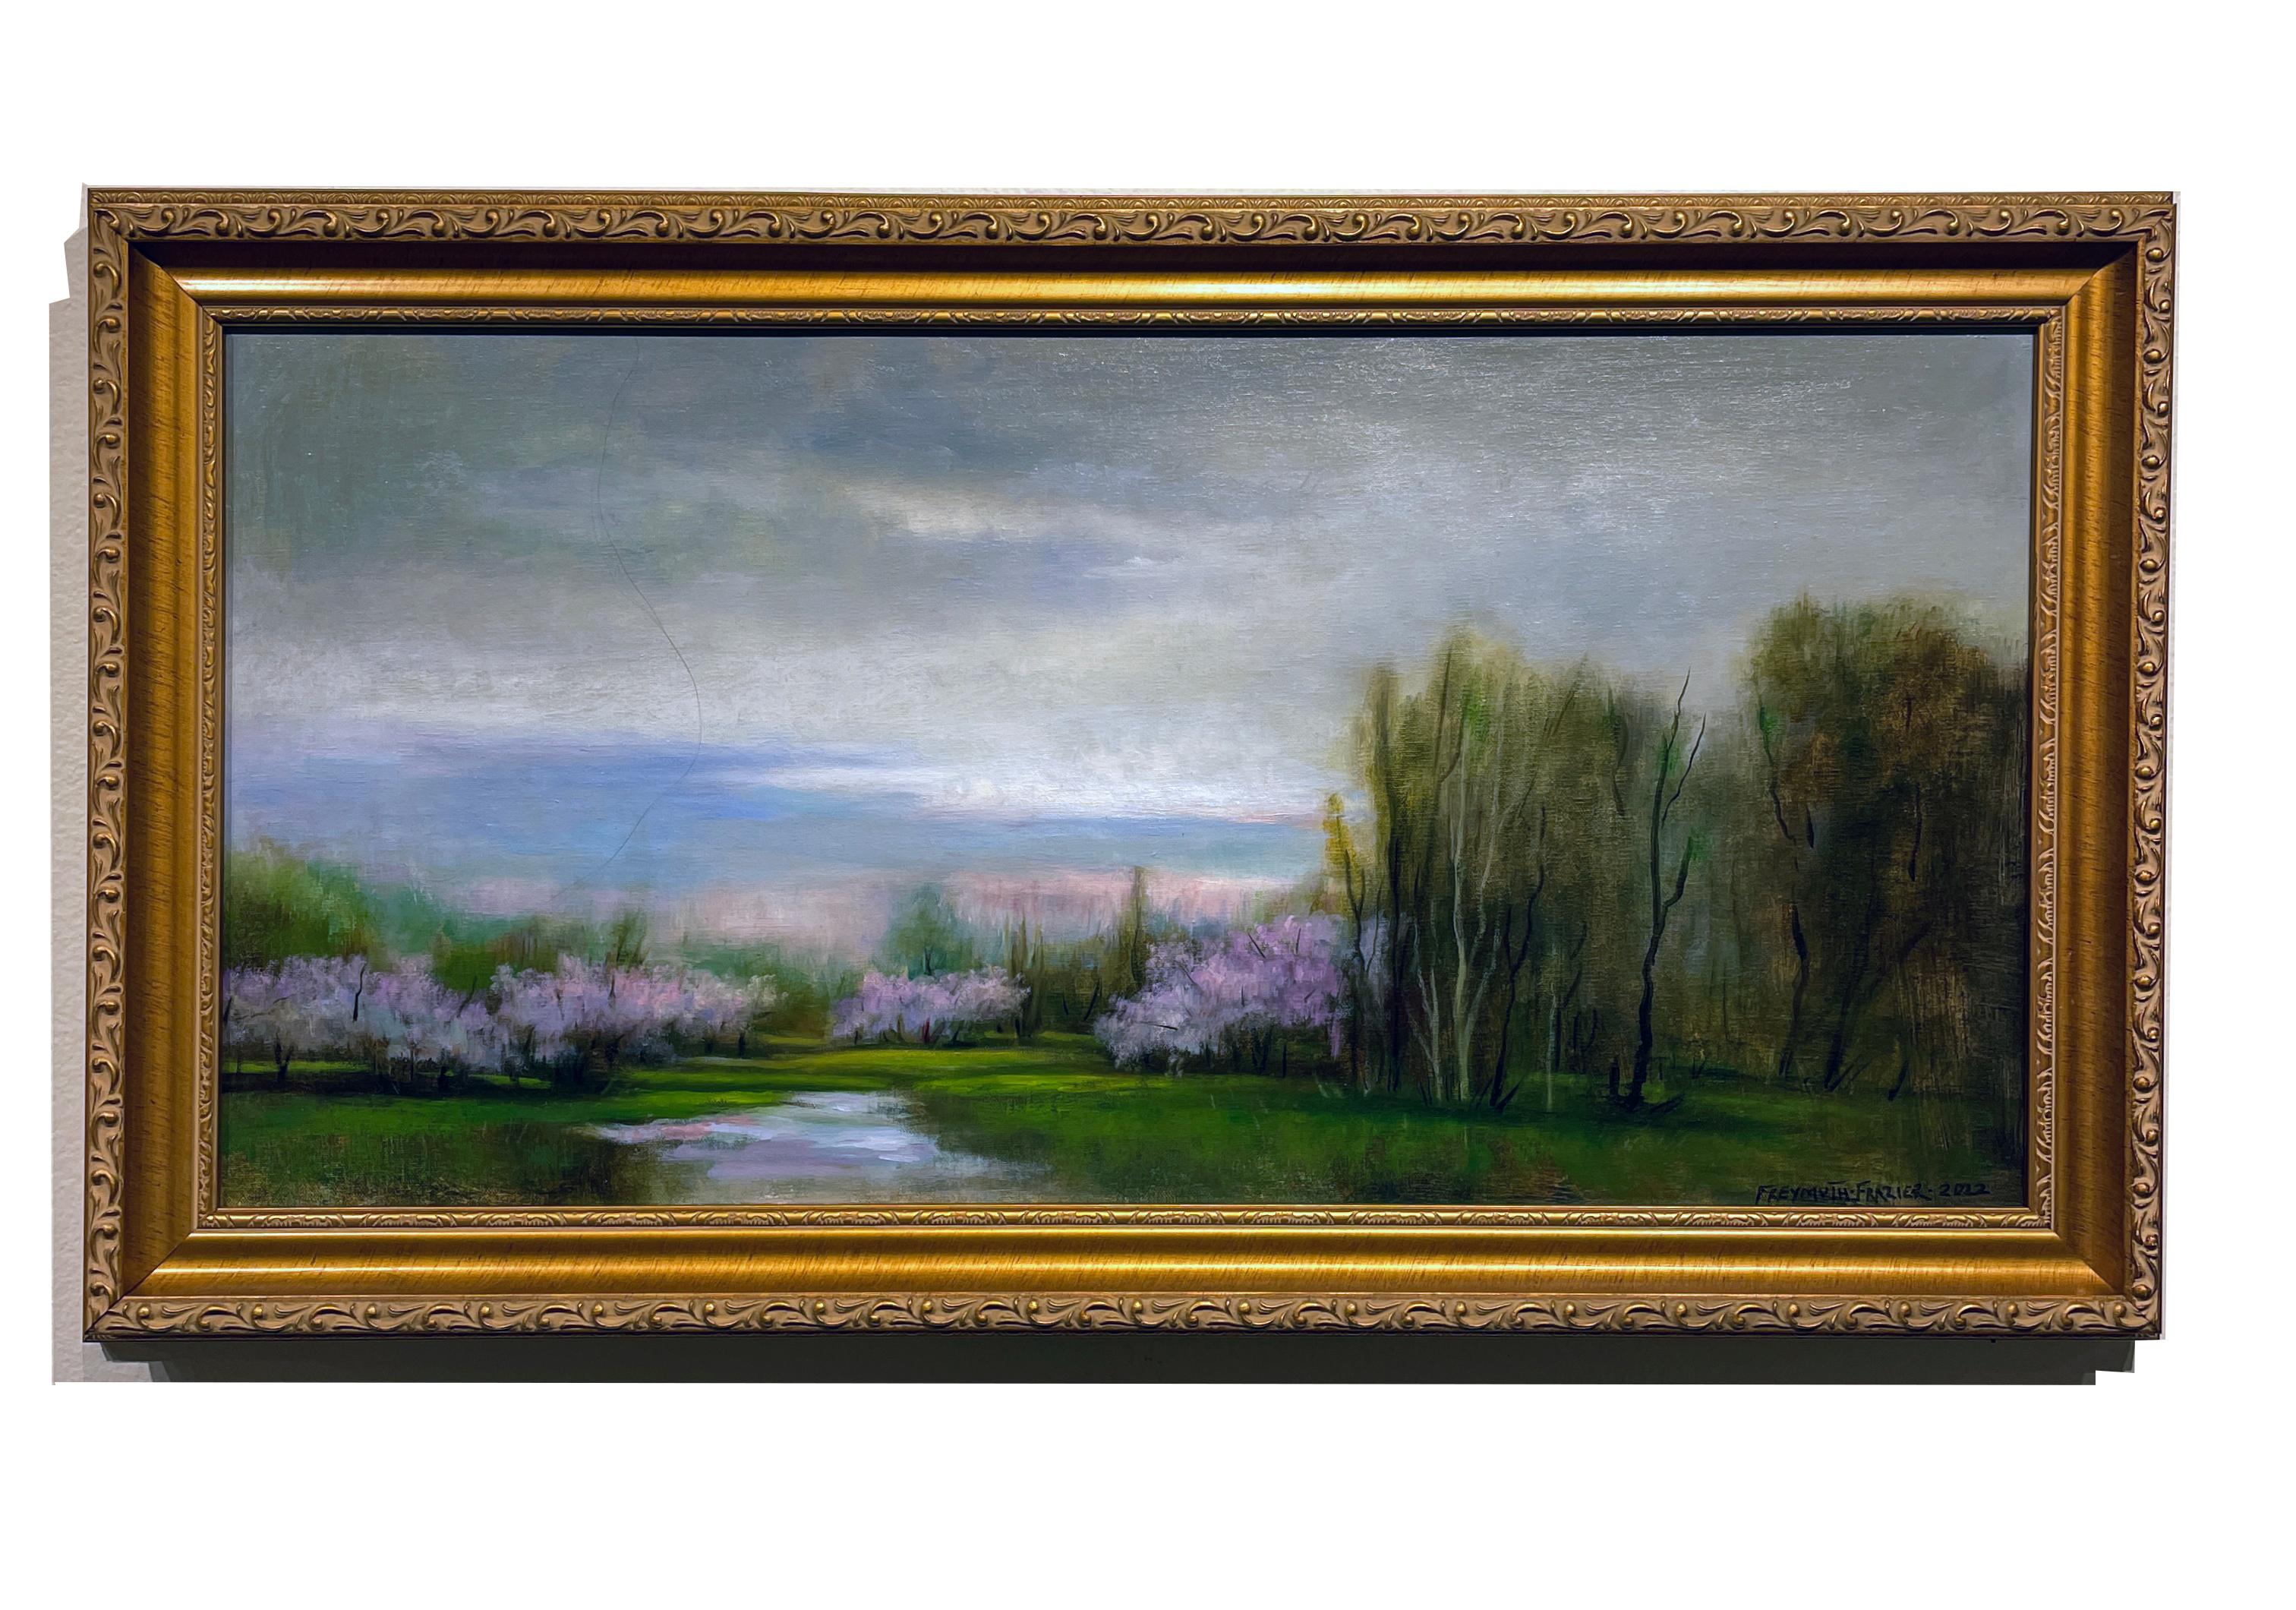 Cloud Cover - Early Spring Landscape with Pastel Flowering Trees, Original Oil  - Painting by Rose Freymuth-Frazier